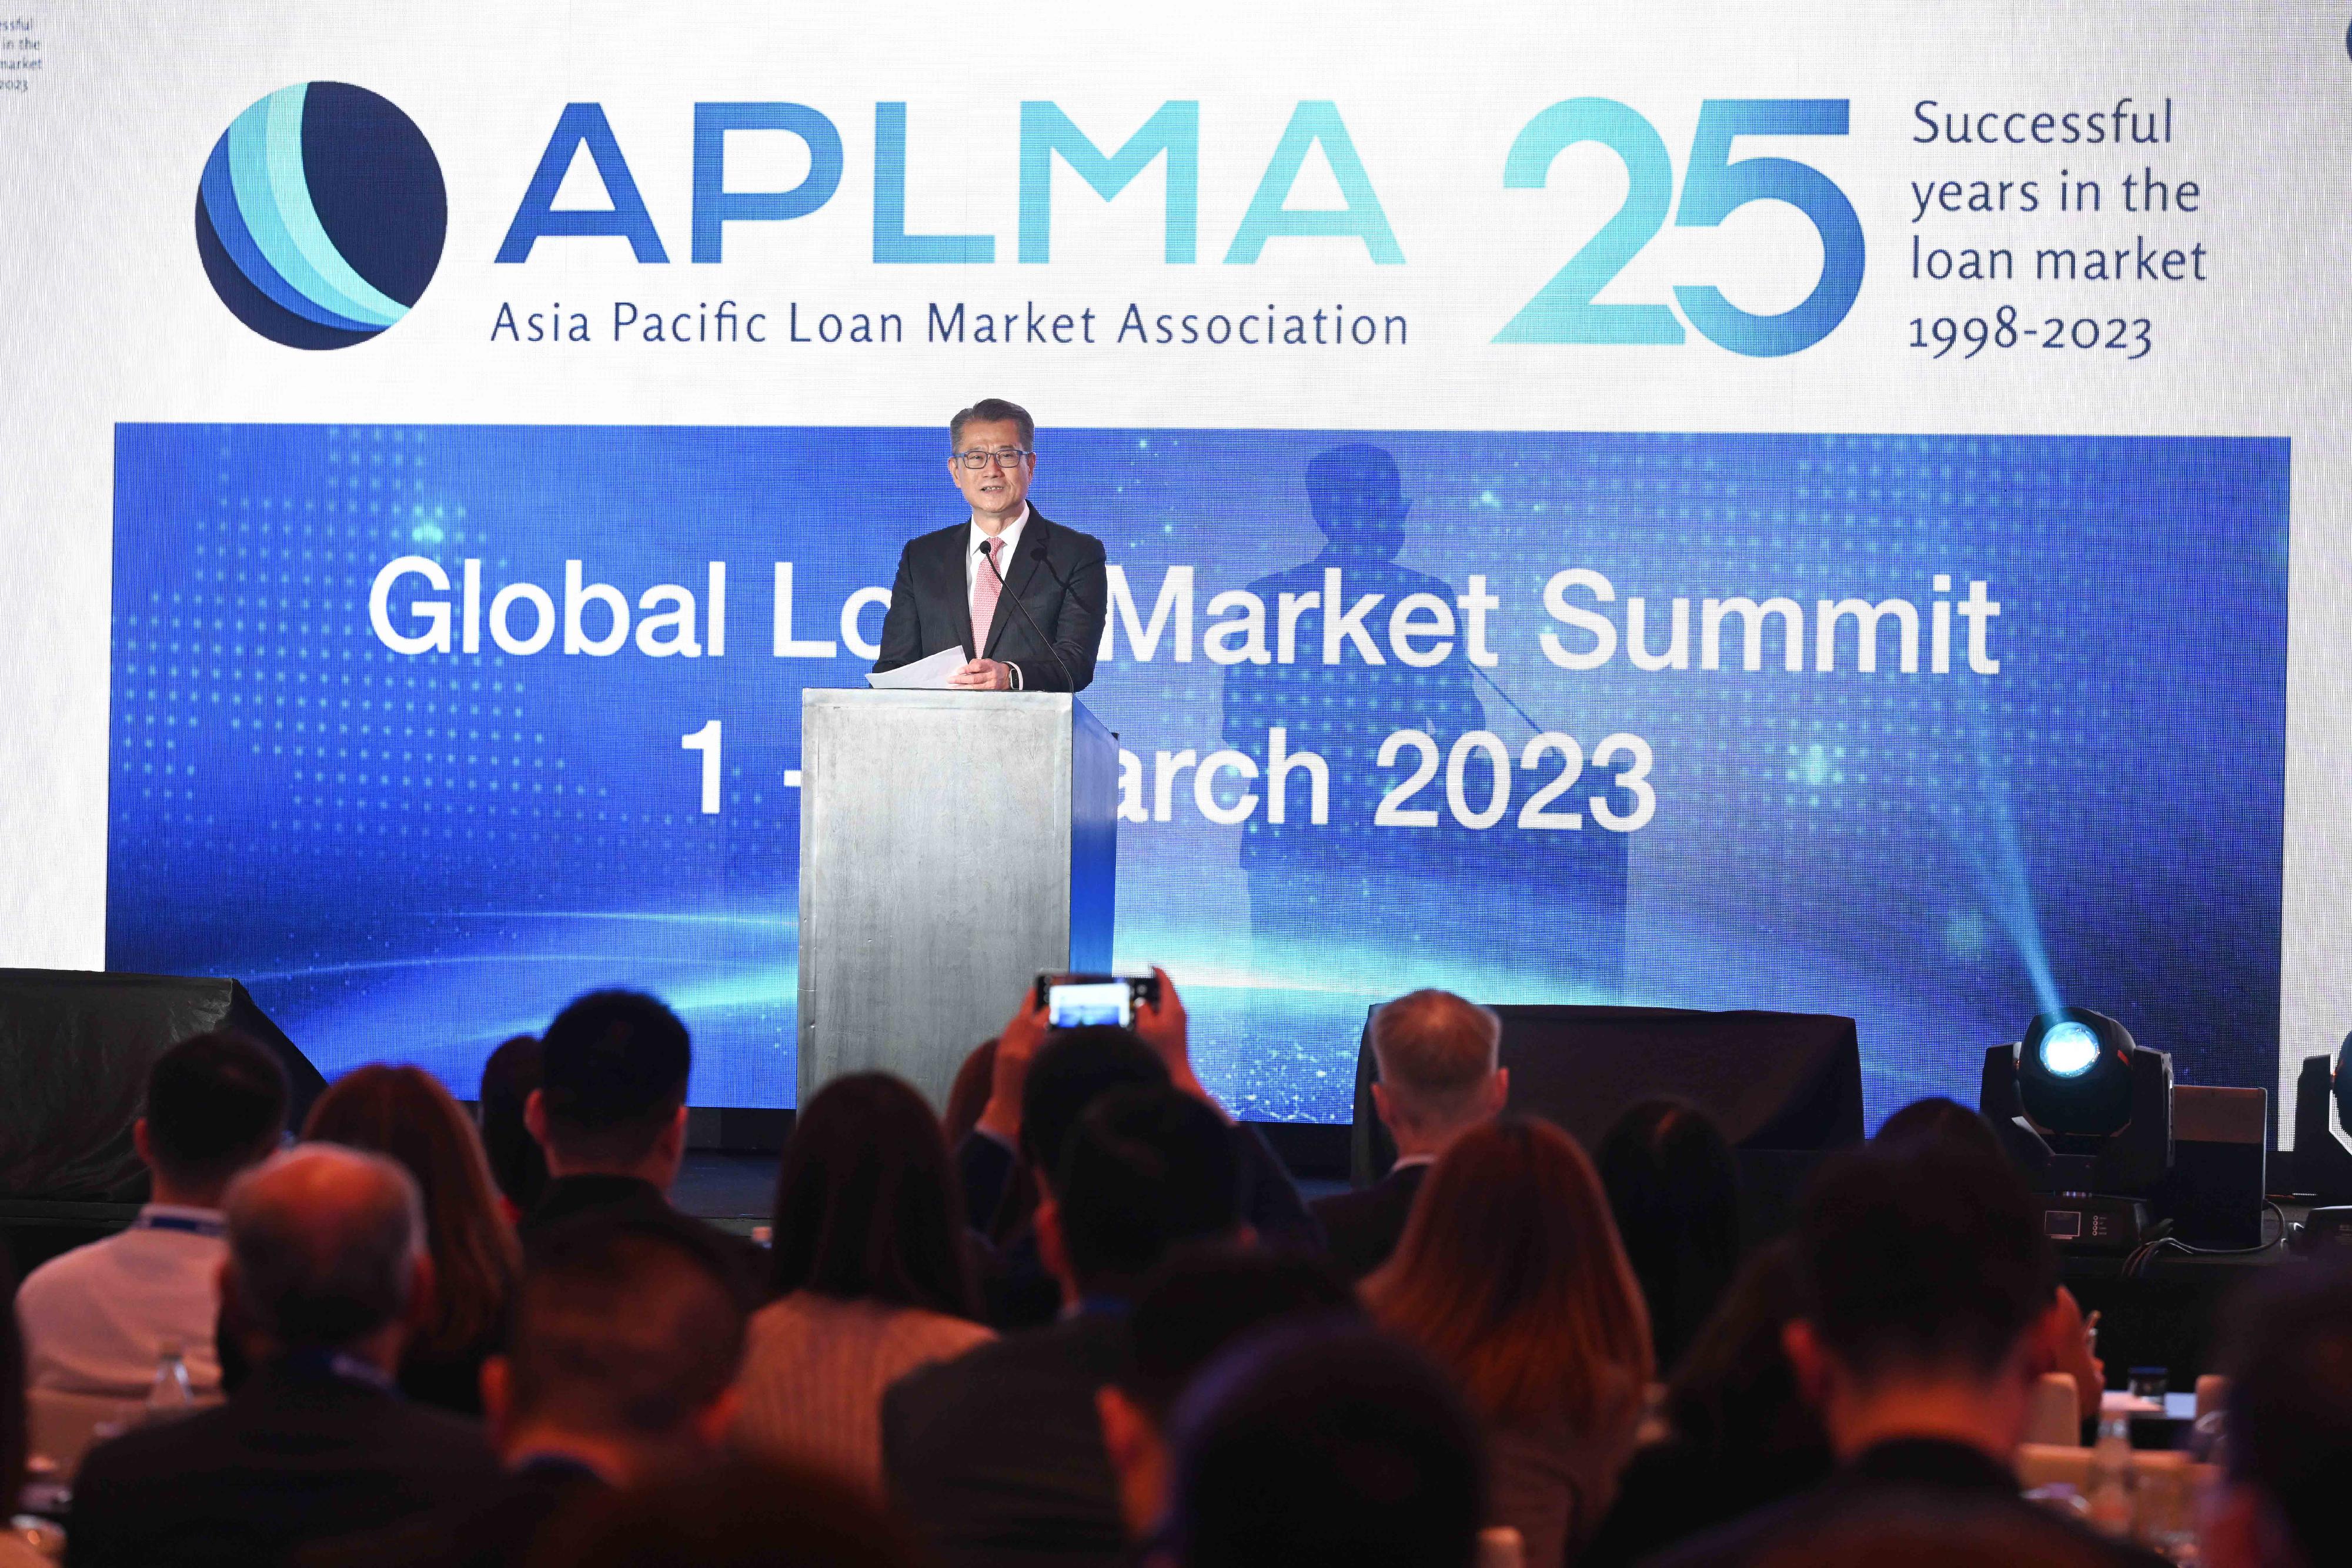 The Financial Secretary, Mr Paul Chan, speaks at the Asia Pacific Loan Market Association Global Loan Market Summit today (March 1).